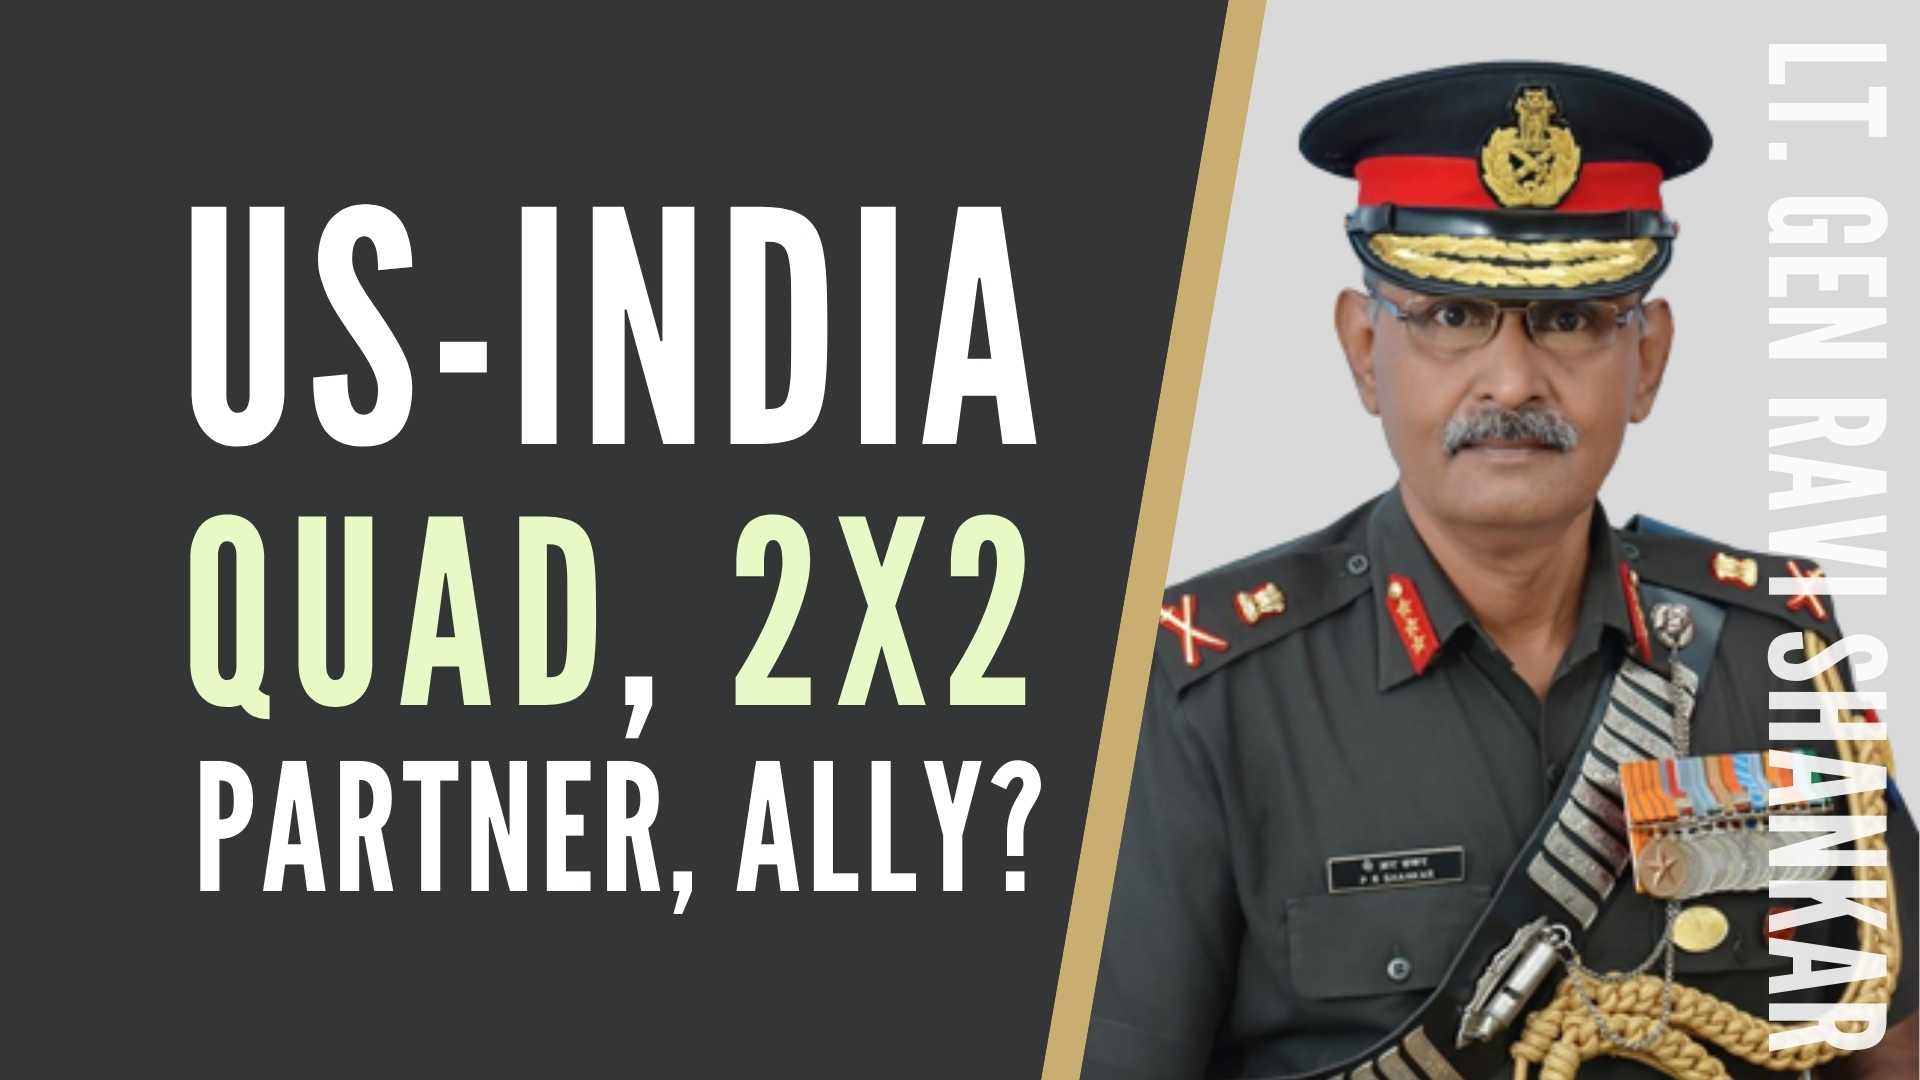 Lt Gen Ravi Shankar and Sree Iyer look at the US-India friendship from different angles and what is playing out - the difference between a US ally and a US partner, S-400 and CATSA sanctions, QUAD vs 2x2. A free-wheeling conversation that you don't want to miss!